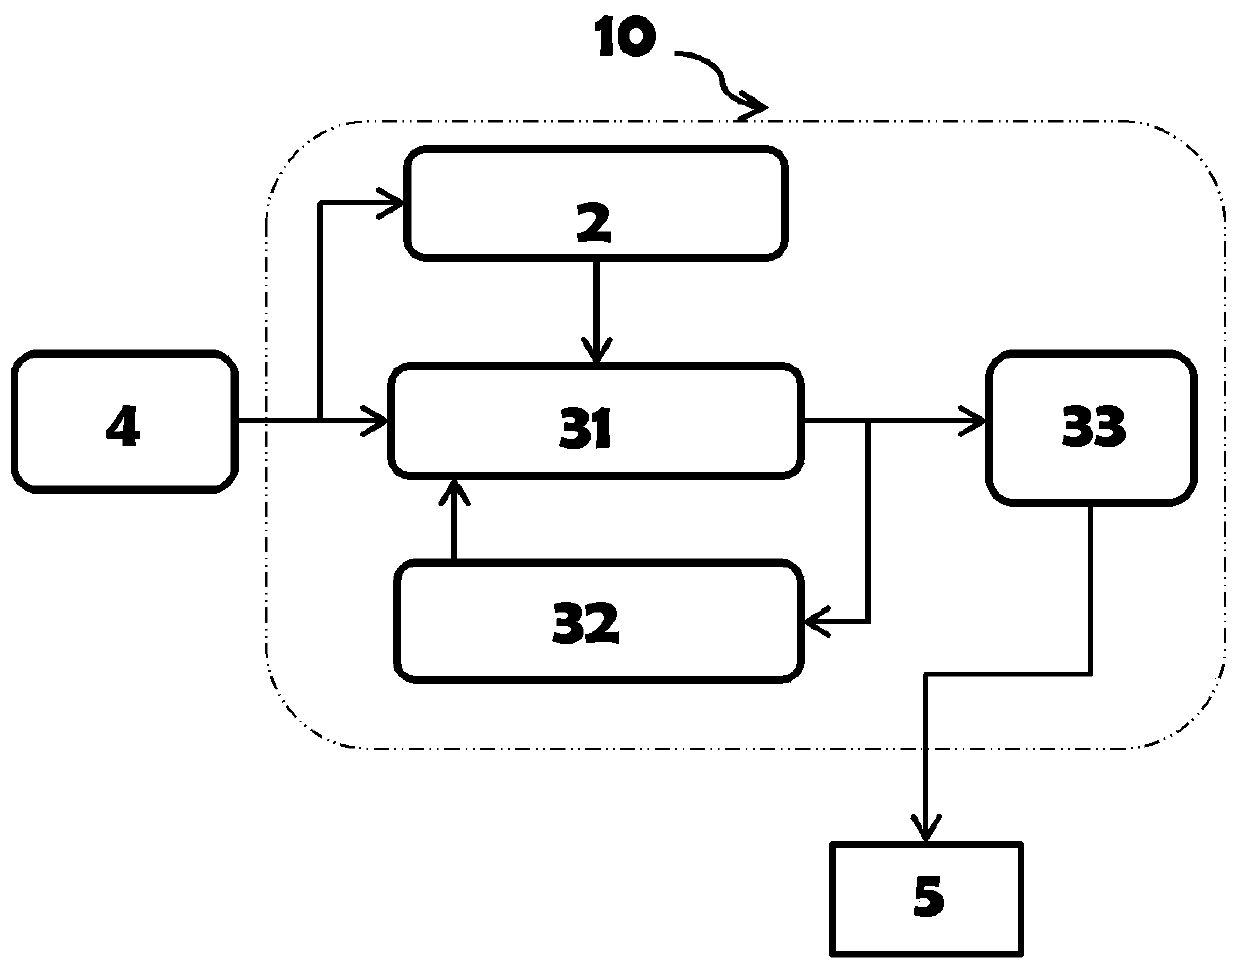 System for detecting fraud in a data flow